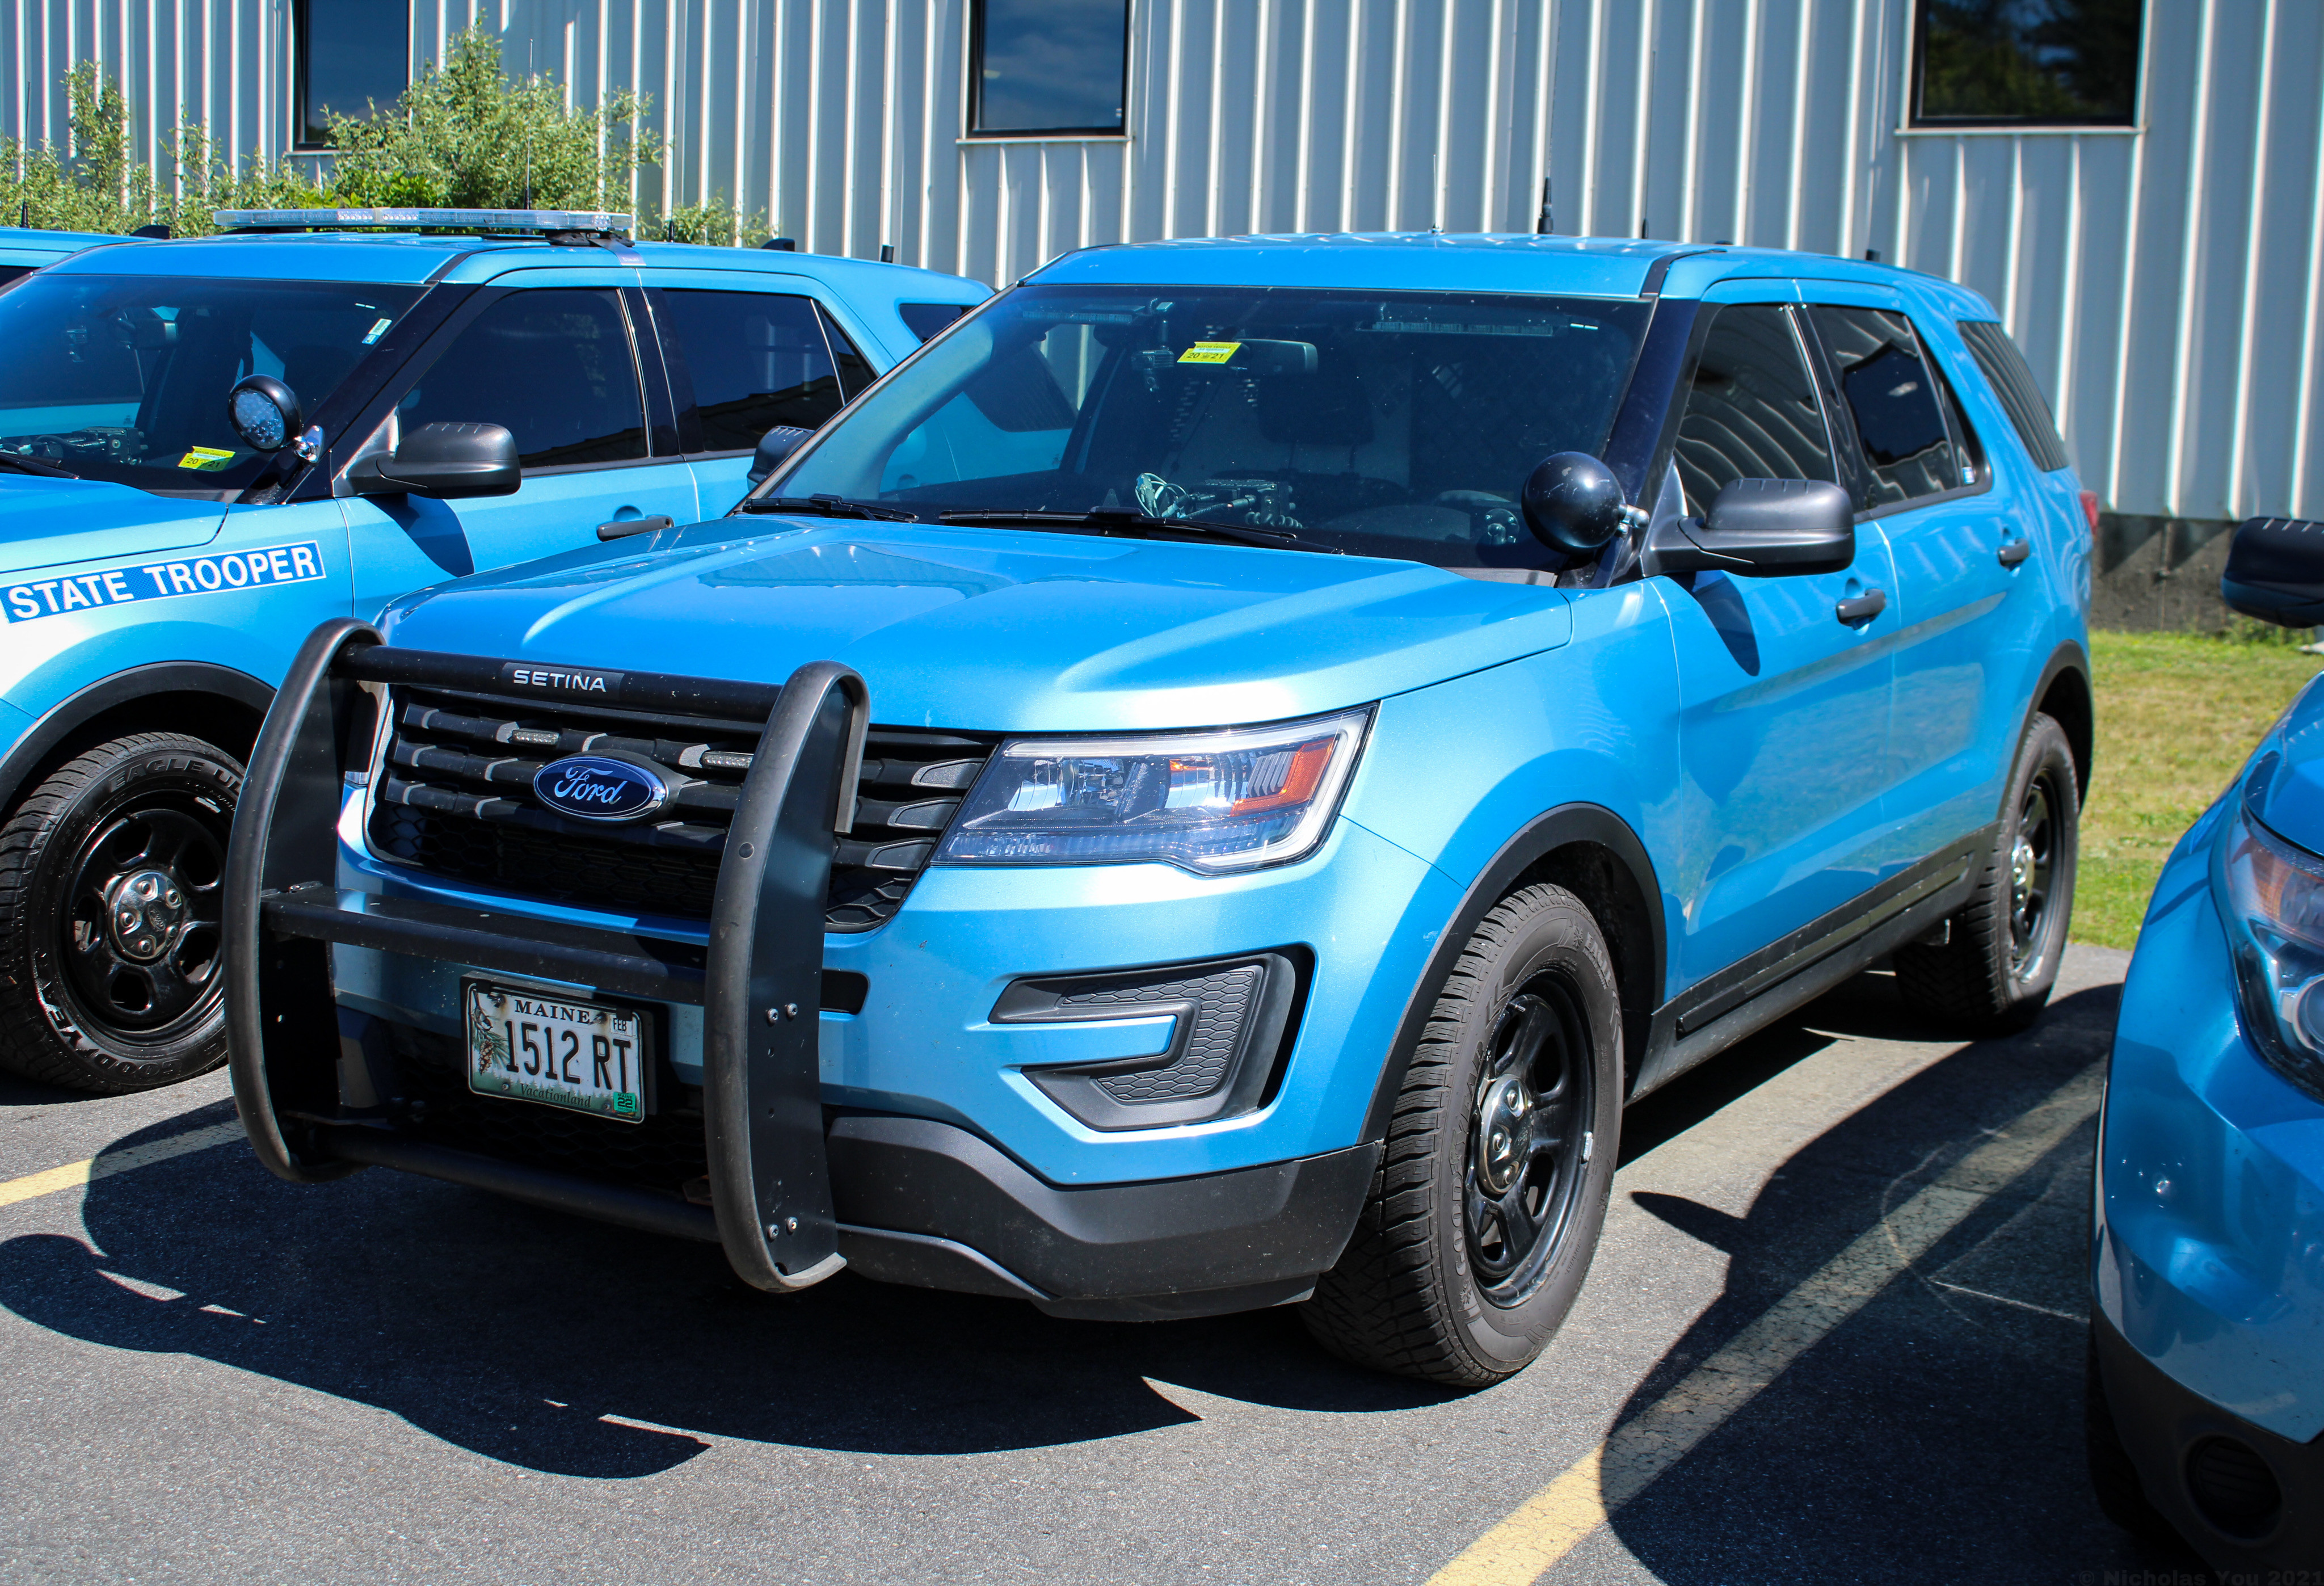 A photo  of Maine State Police
            Unmarked Unit, a 2016-2019 Ford Police Interceptor Utility             taken by Nicholas You